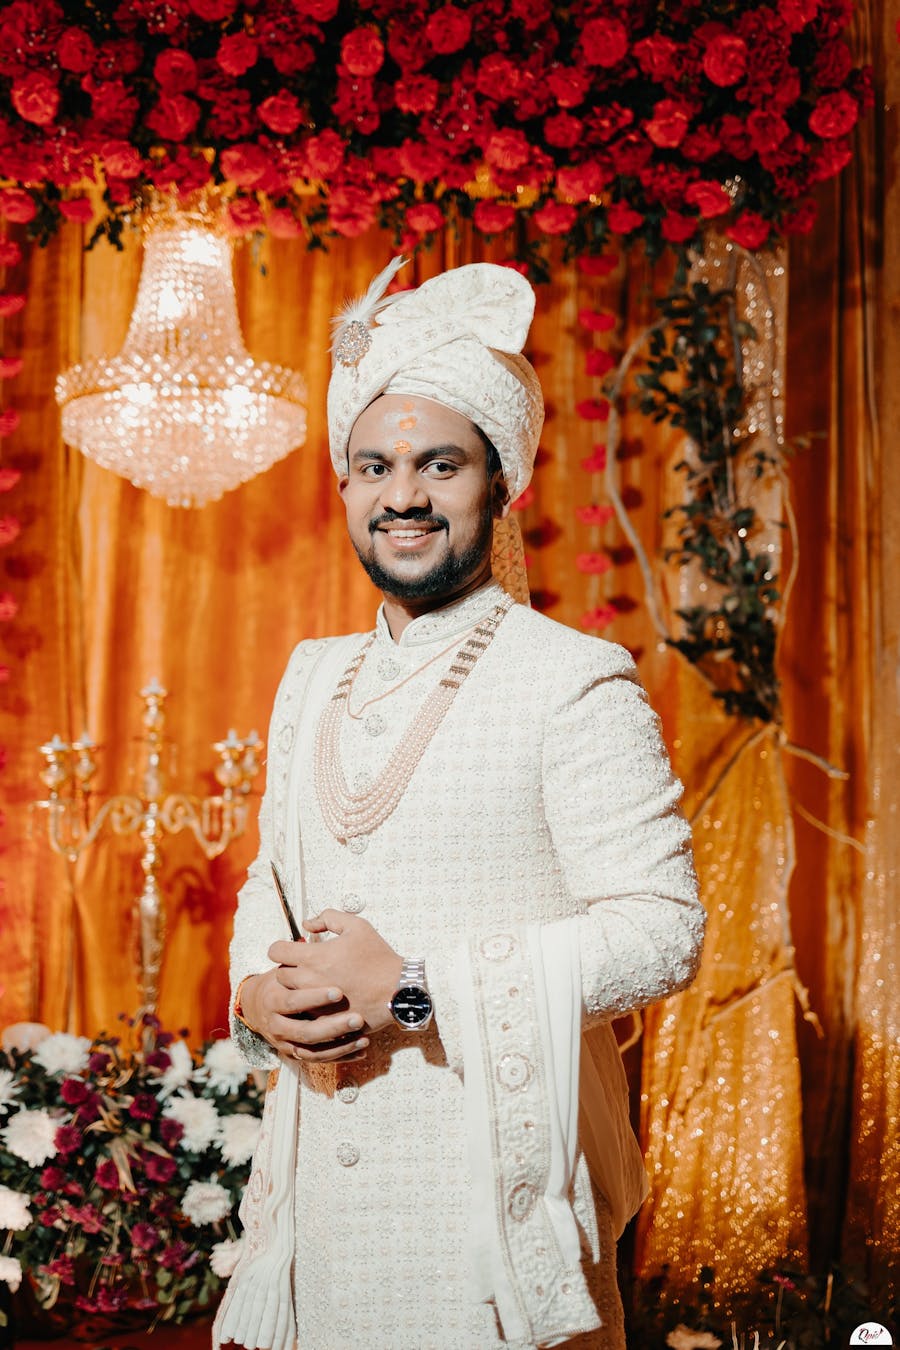 Wedding accessories for Indian groom